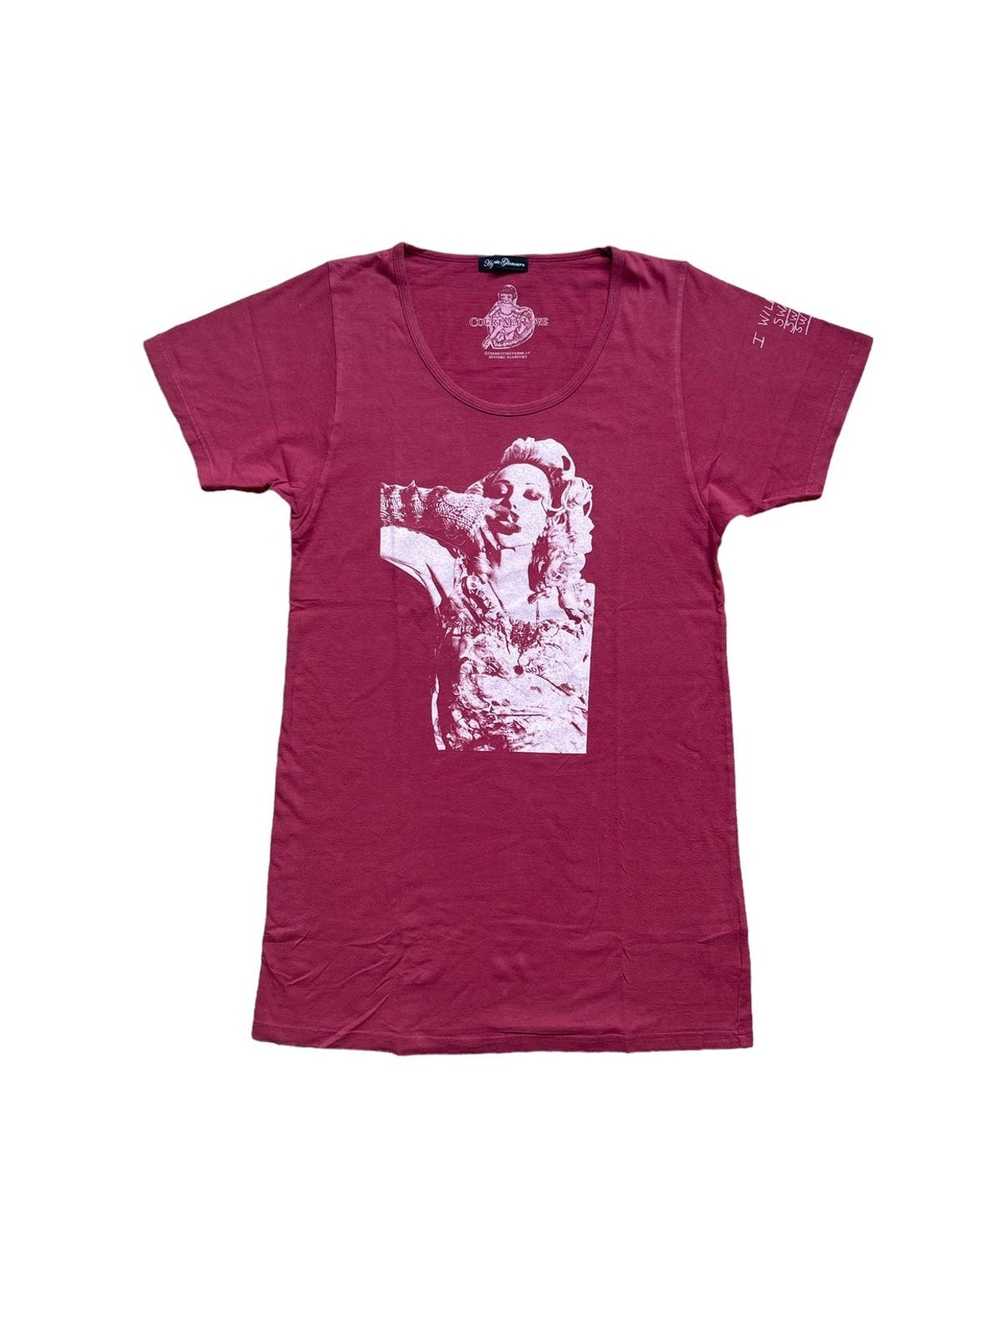 Hysteric Glamour Hysteric Glamour X Courtney Love… - image 1